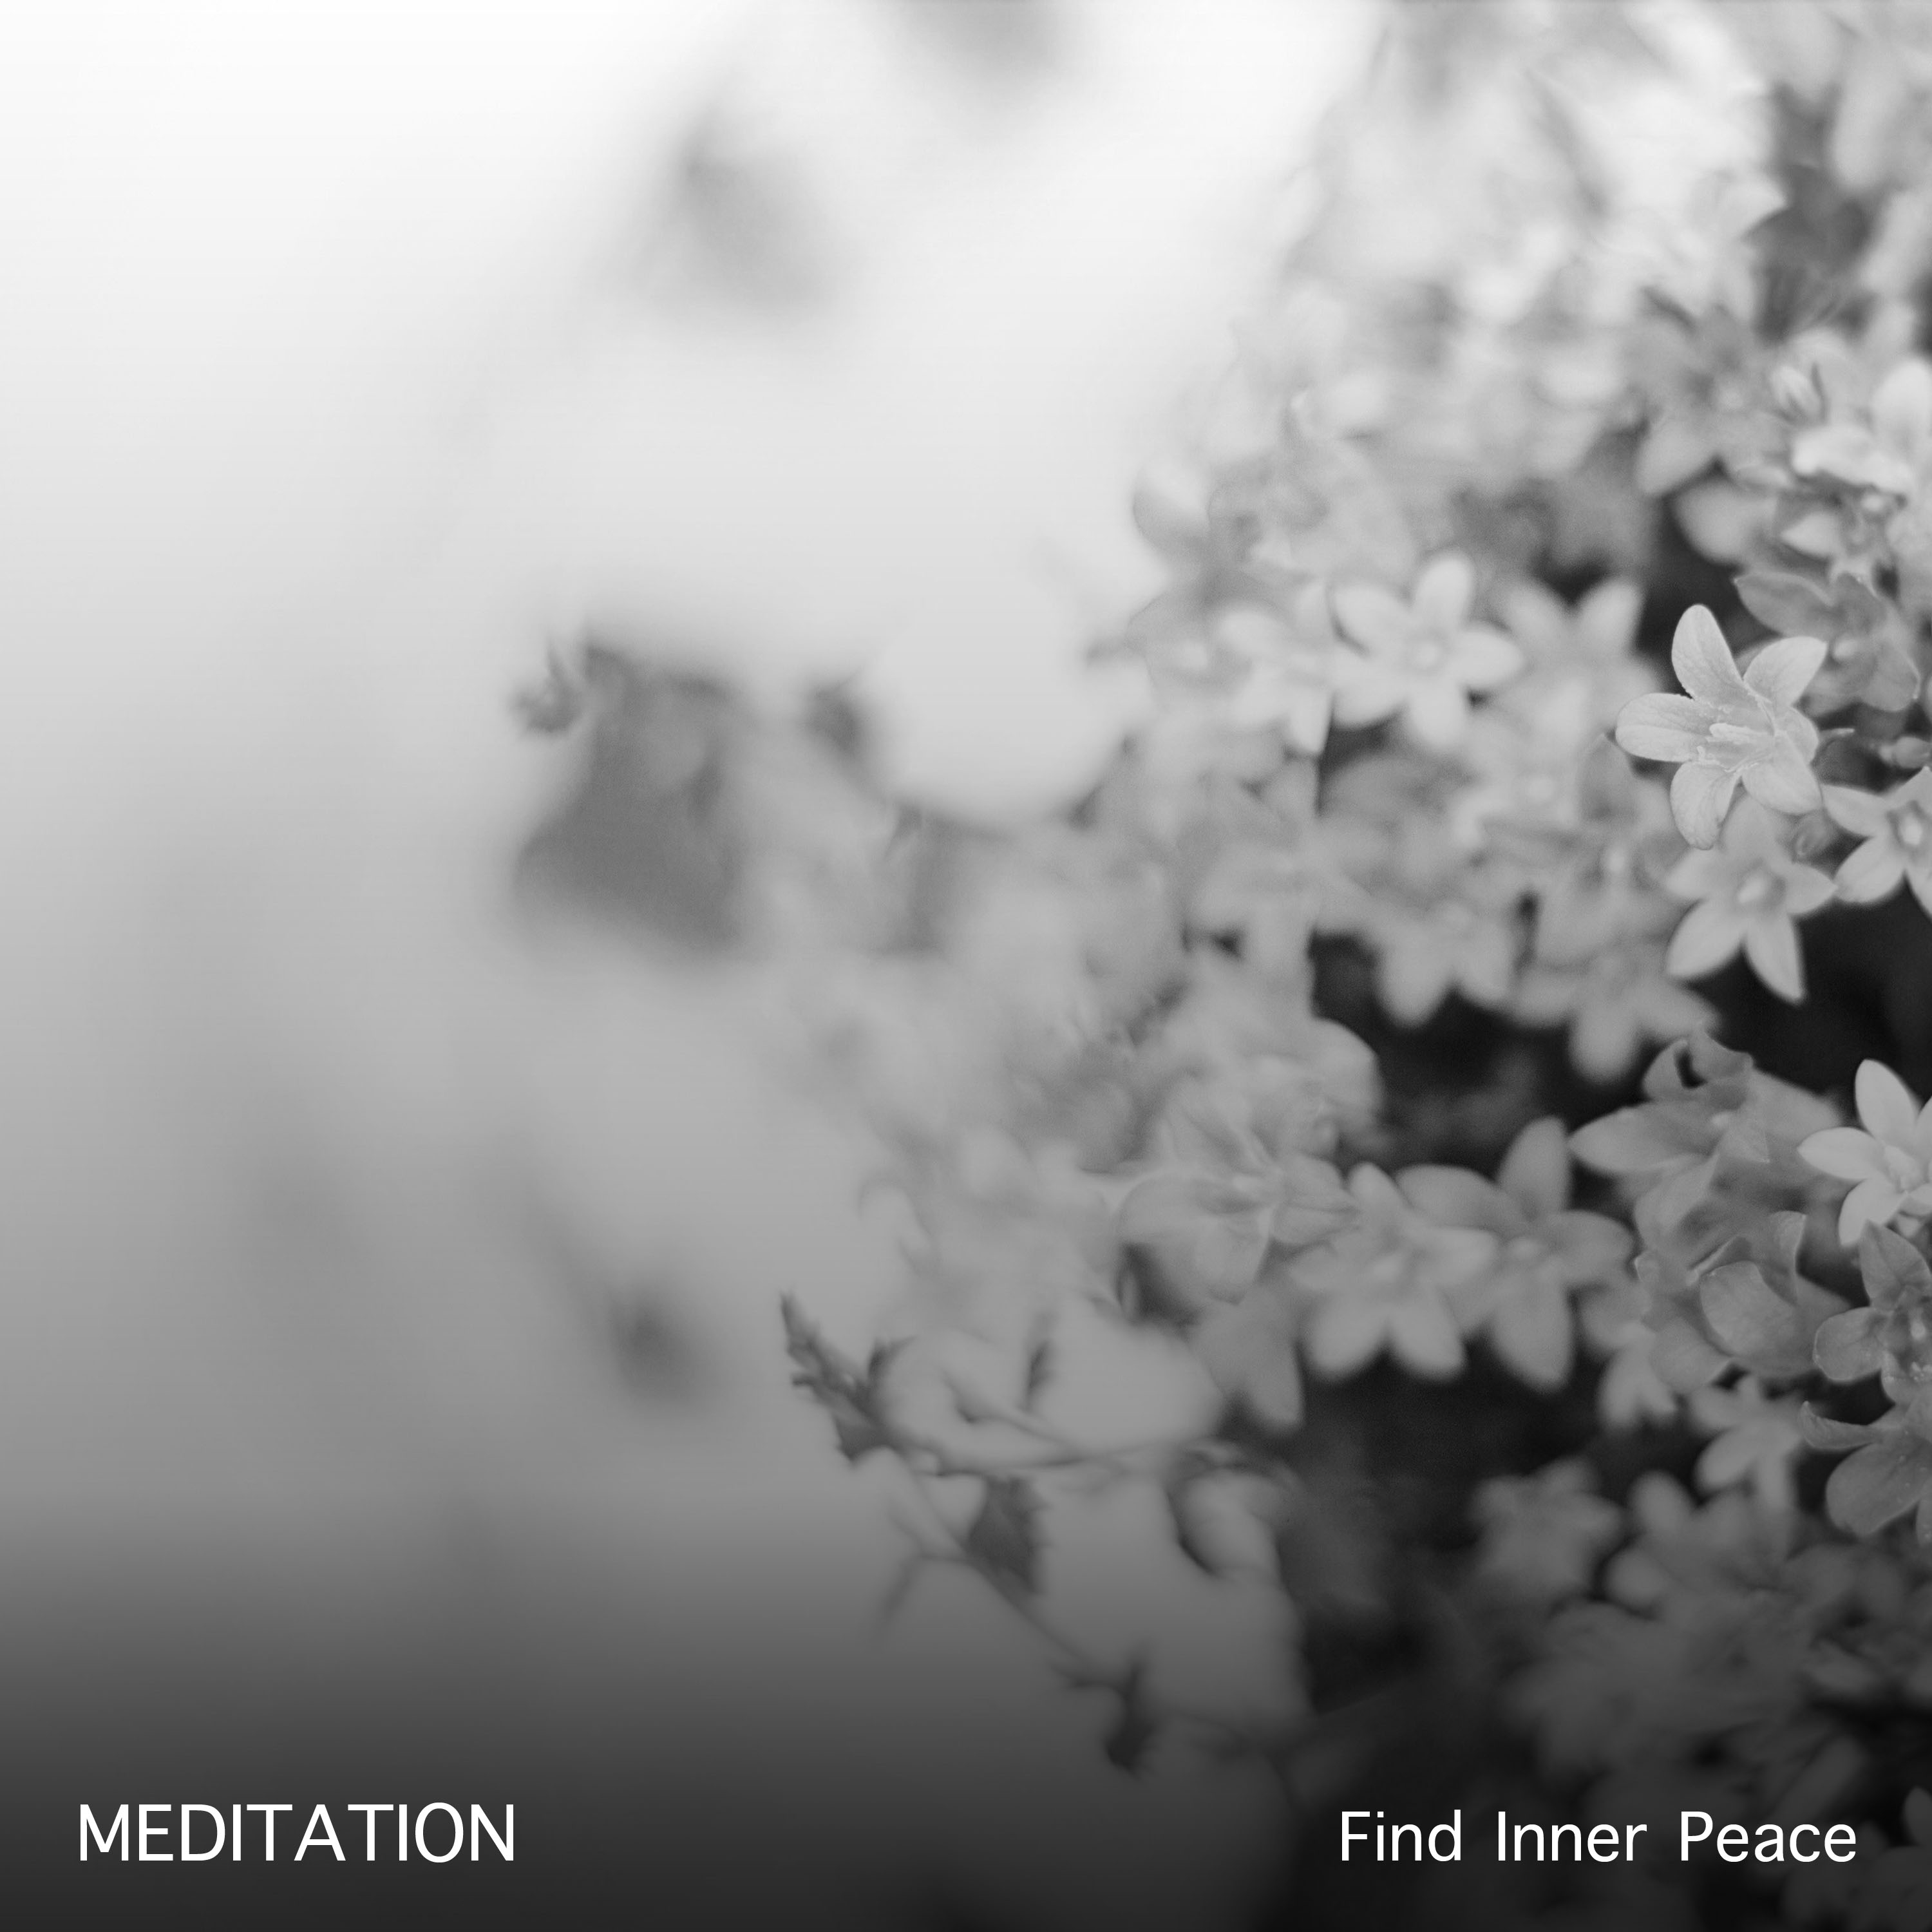 25 Tracks to Practice Meditation and Find Inner Peace